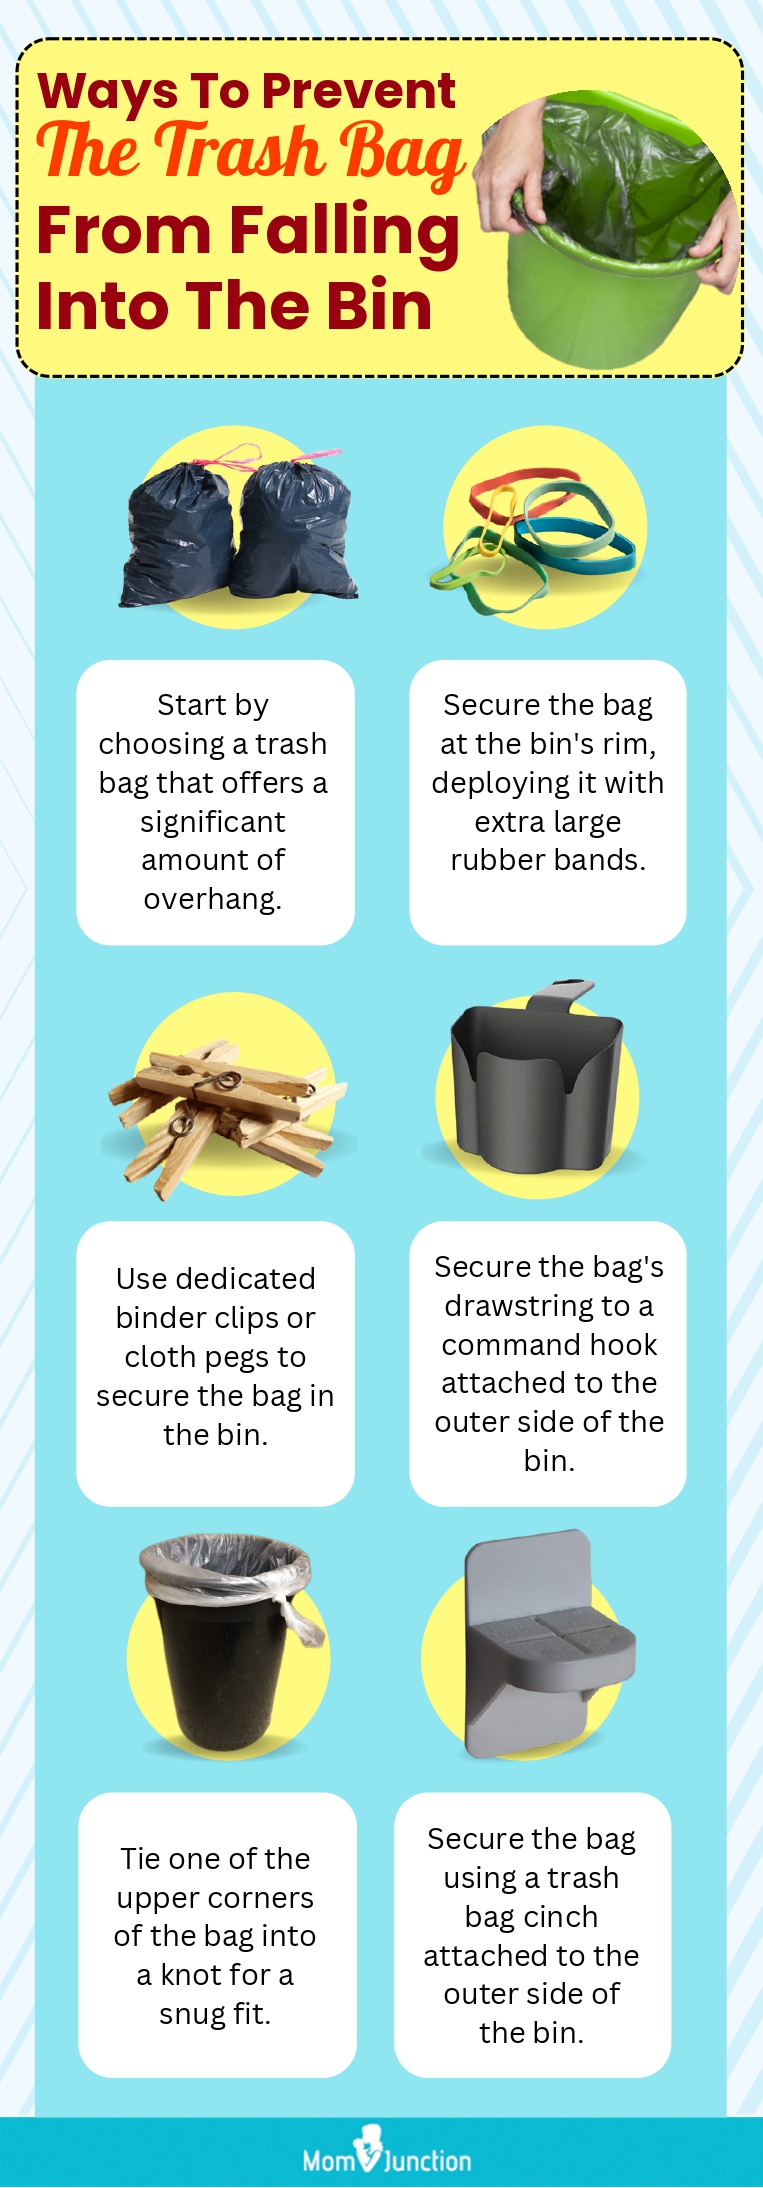 https://www.momjunction.com/wp-content/uploads/2020/09/Ways-To-Prevent-The-Trash-Bag-From-Falling-Into-The-Bin-1_page-0001.jpg